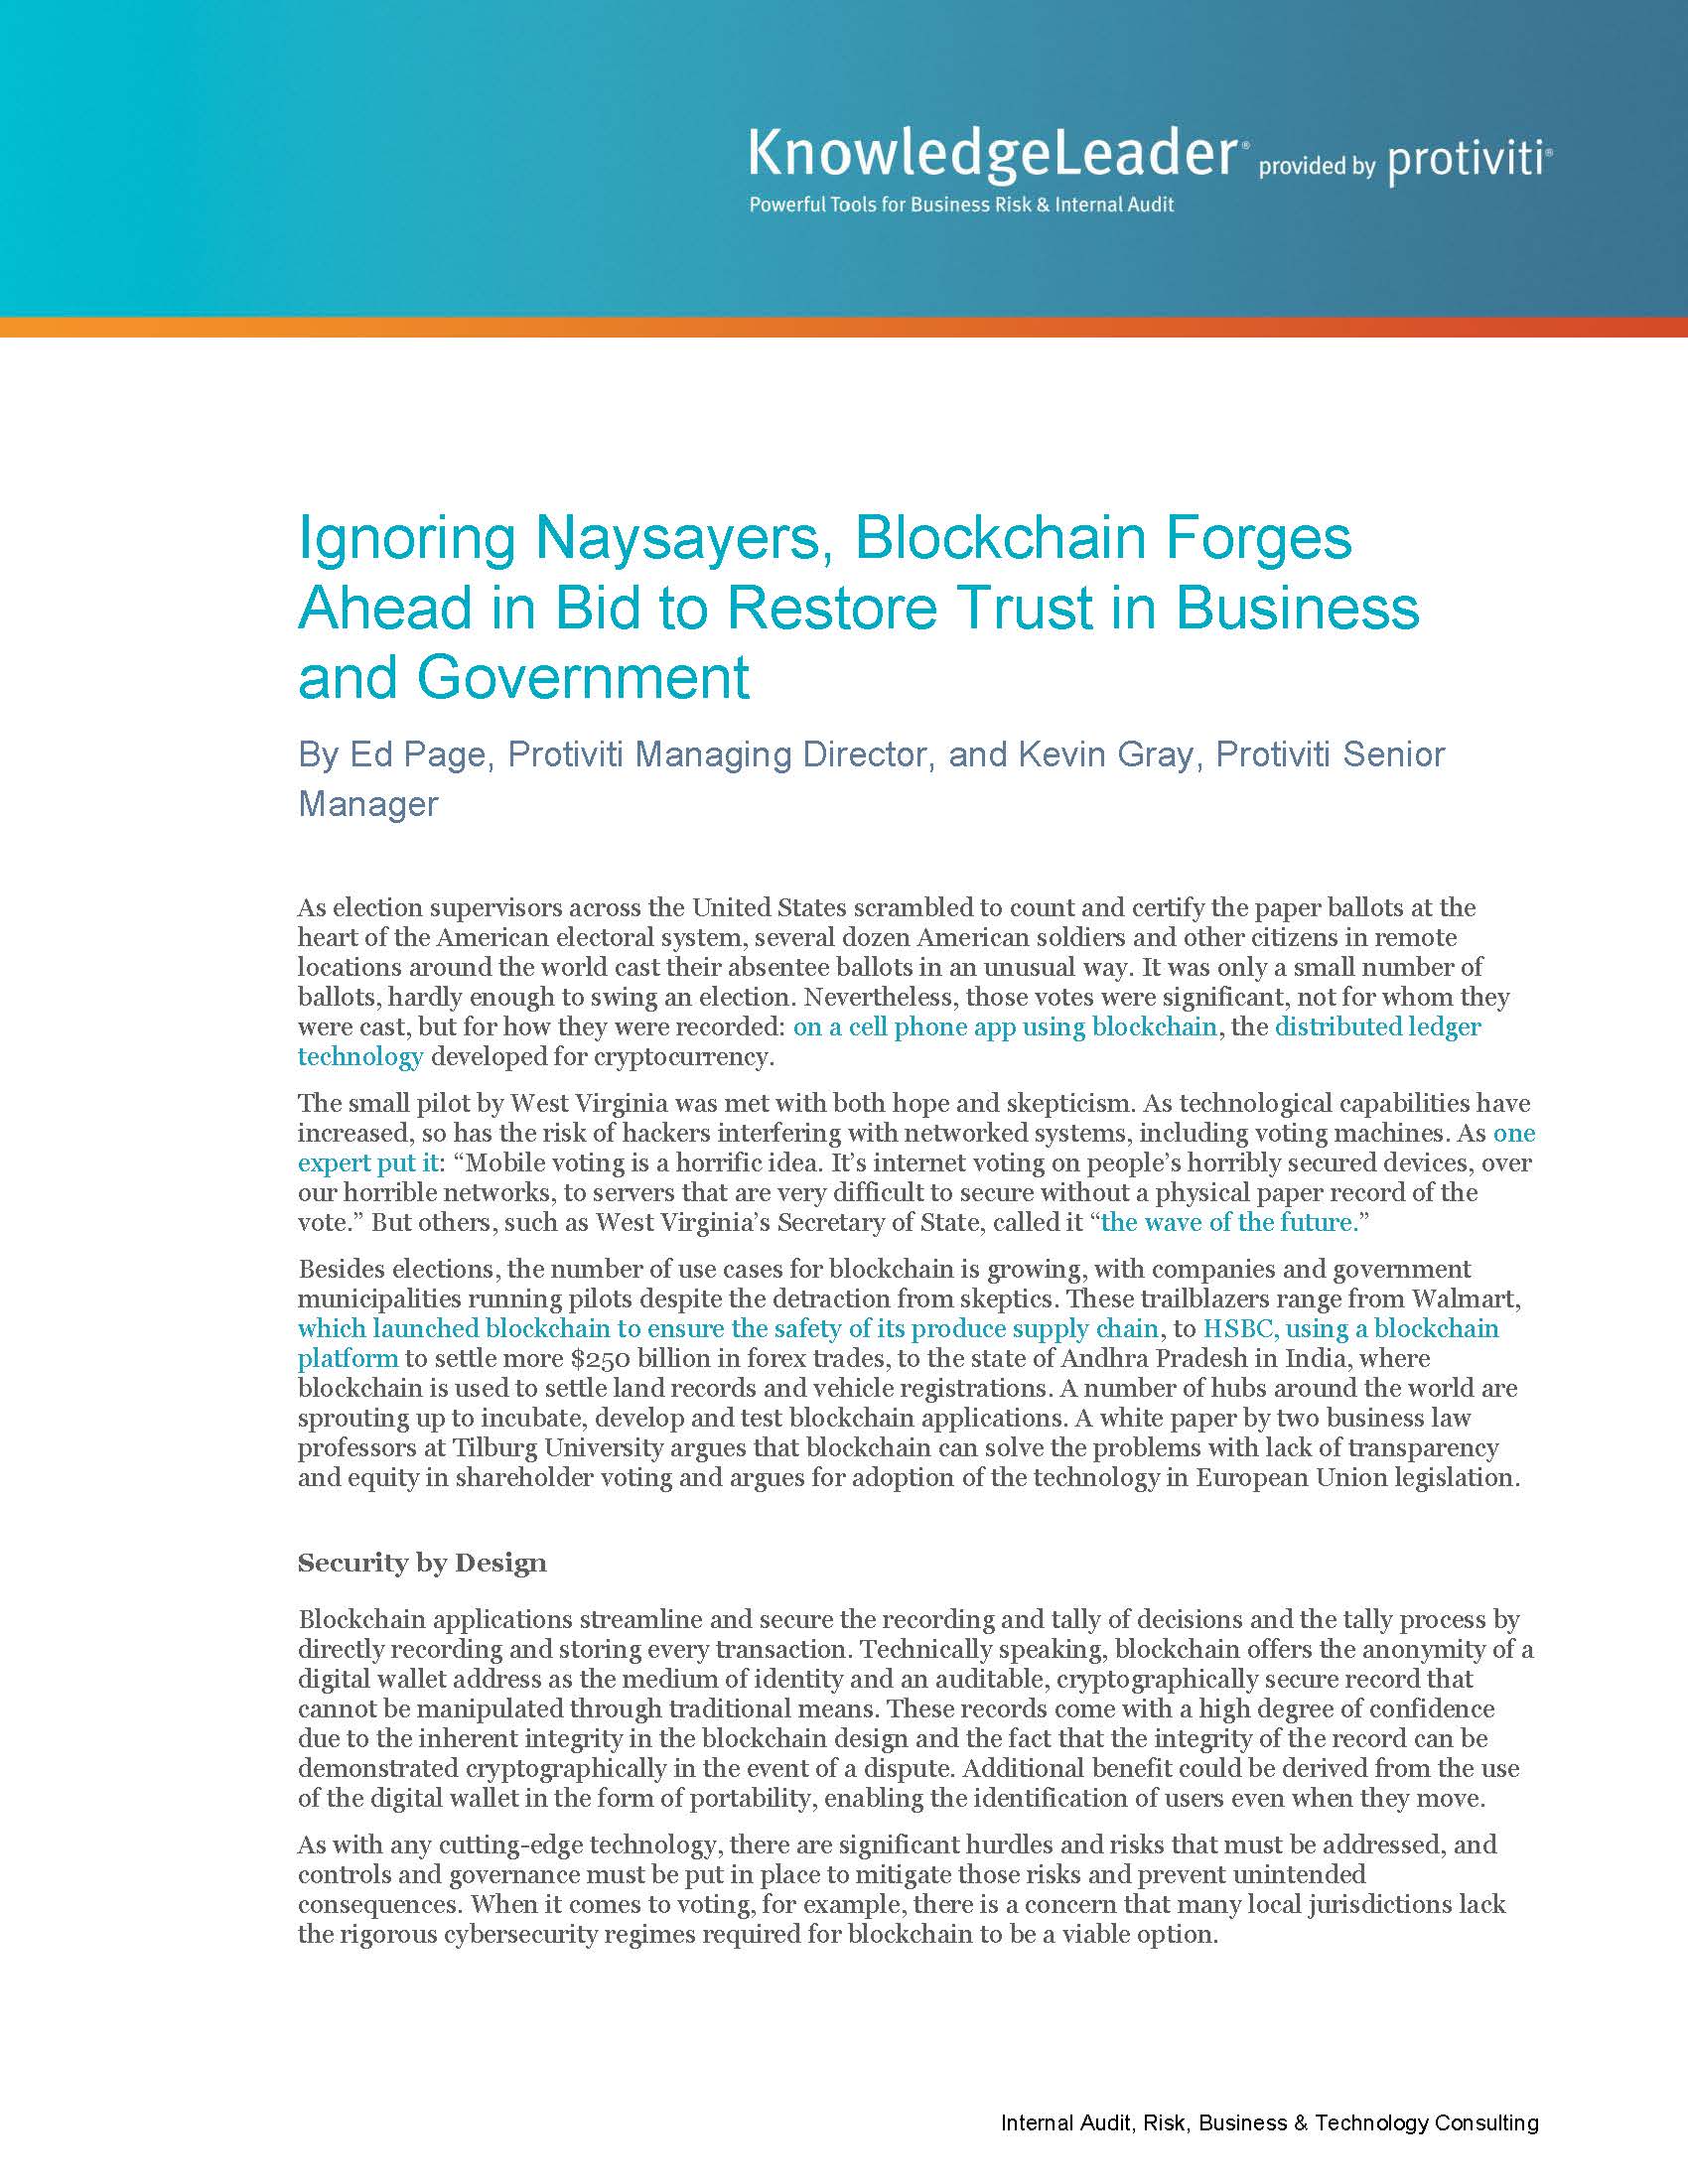 Screenshot of the first page of Ignoring Naysayers, Blockchain Forges Ahead in Bid to Restore Trust in Business and Government